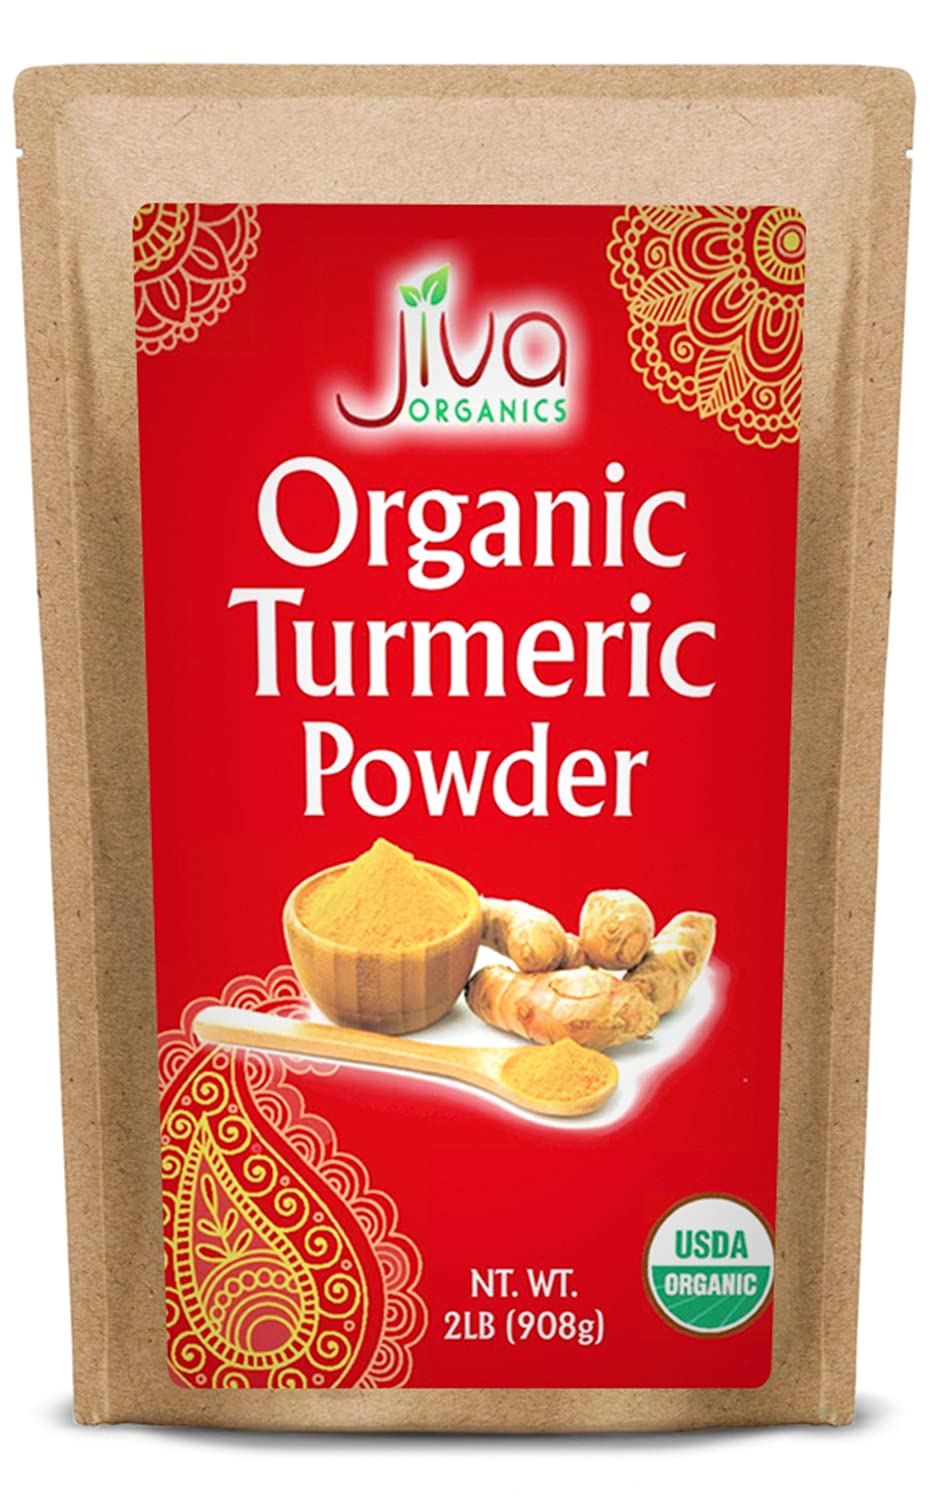 Amazon: Jiva Organics Turmeric Powder - 2 Pound in Resealable Bag, 100% Raw with Curcumin Powder from India, AC & 5% SS, Free PS, 1lb also avail ($5.43) $9.44